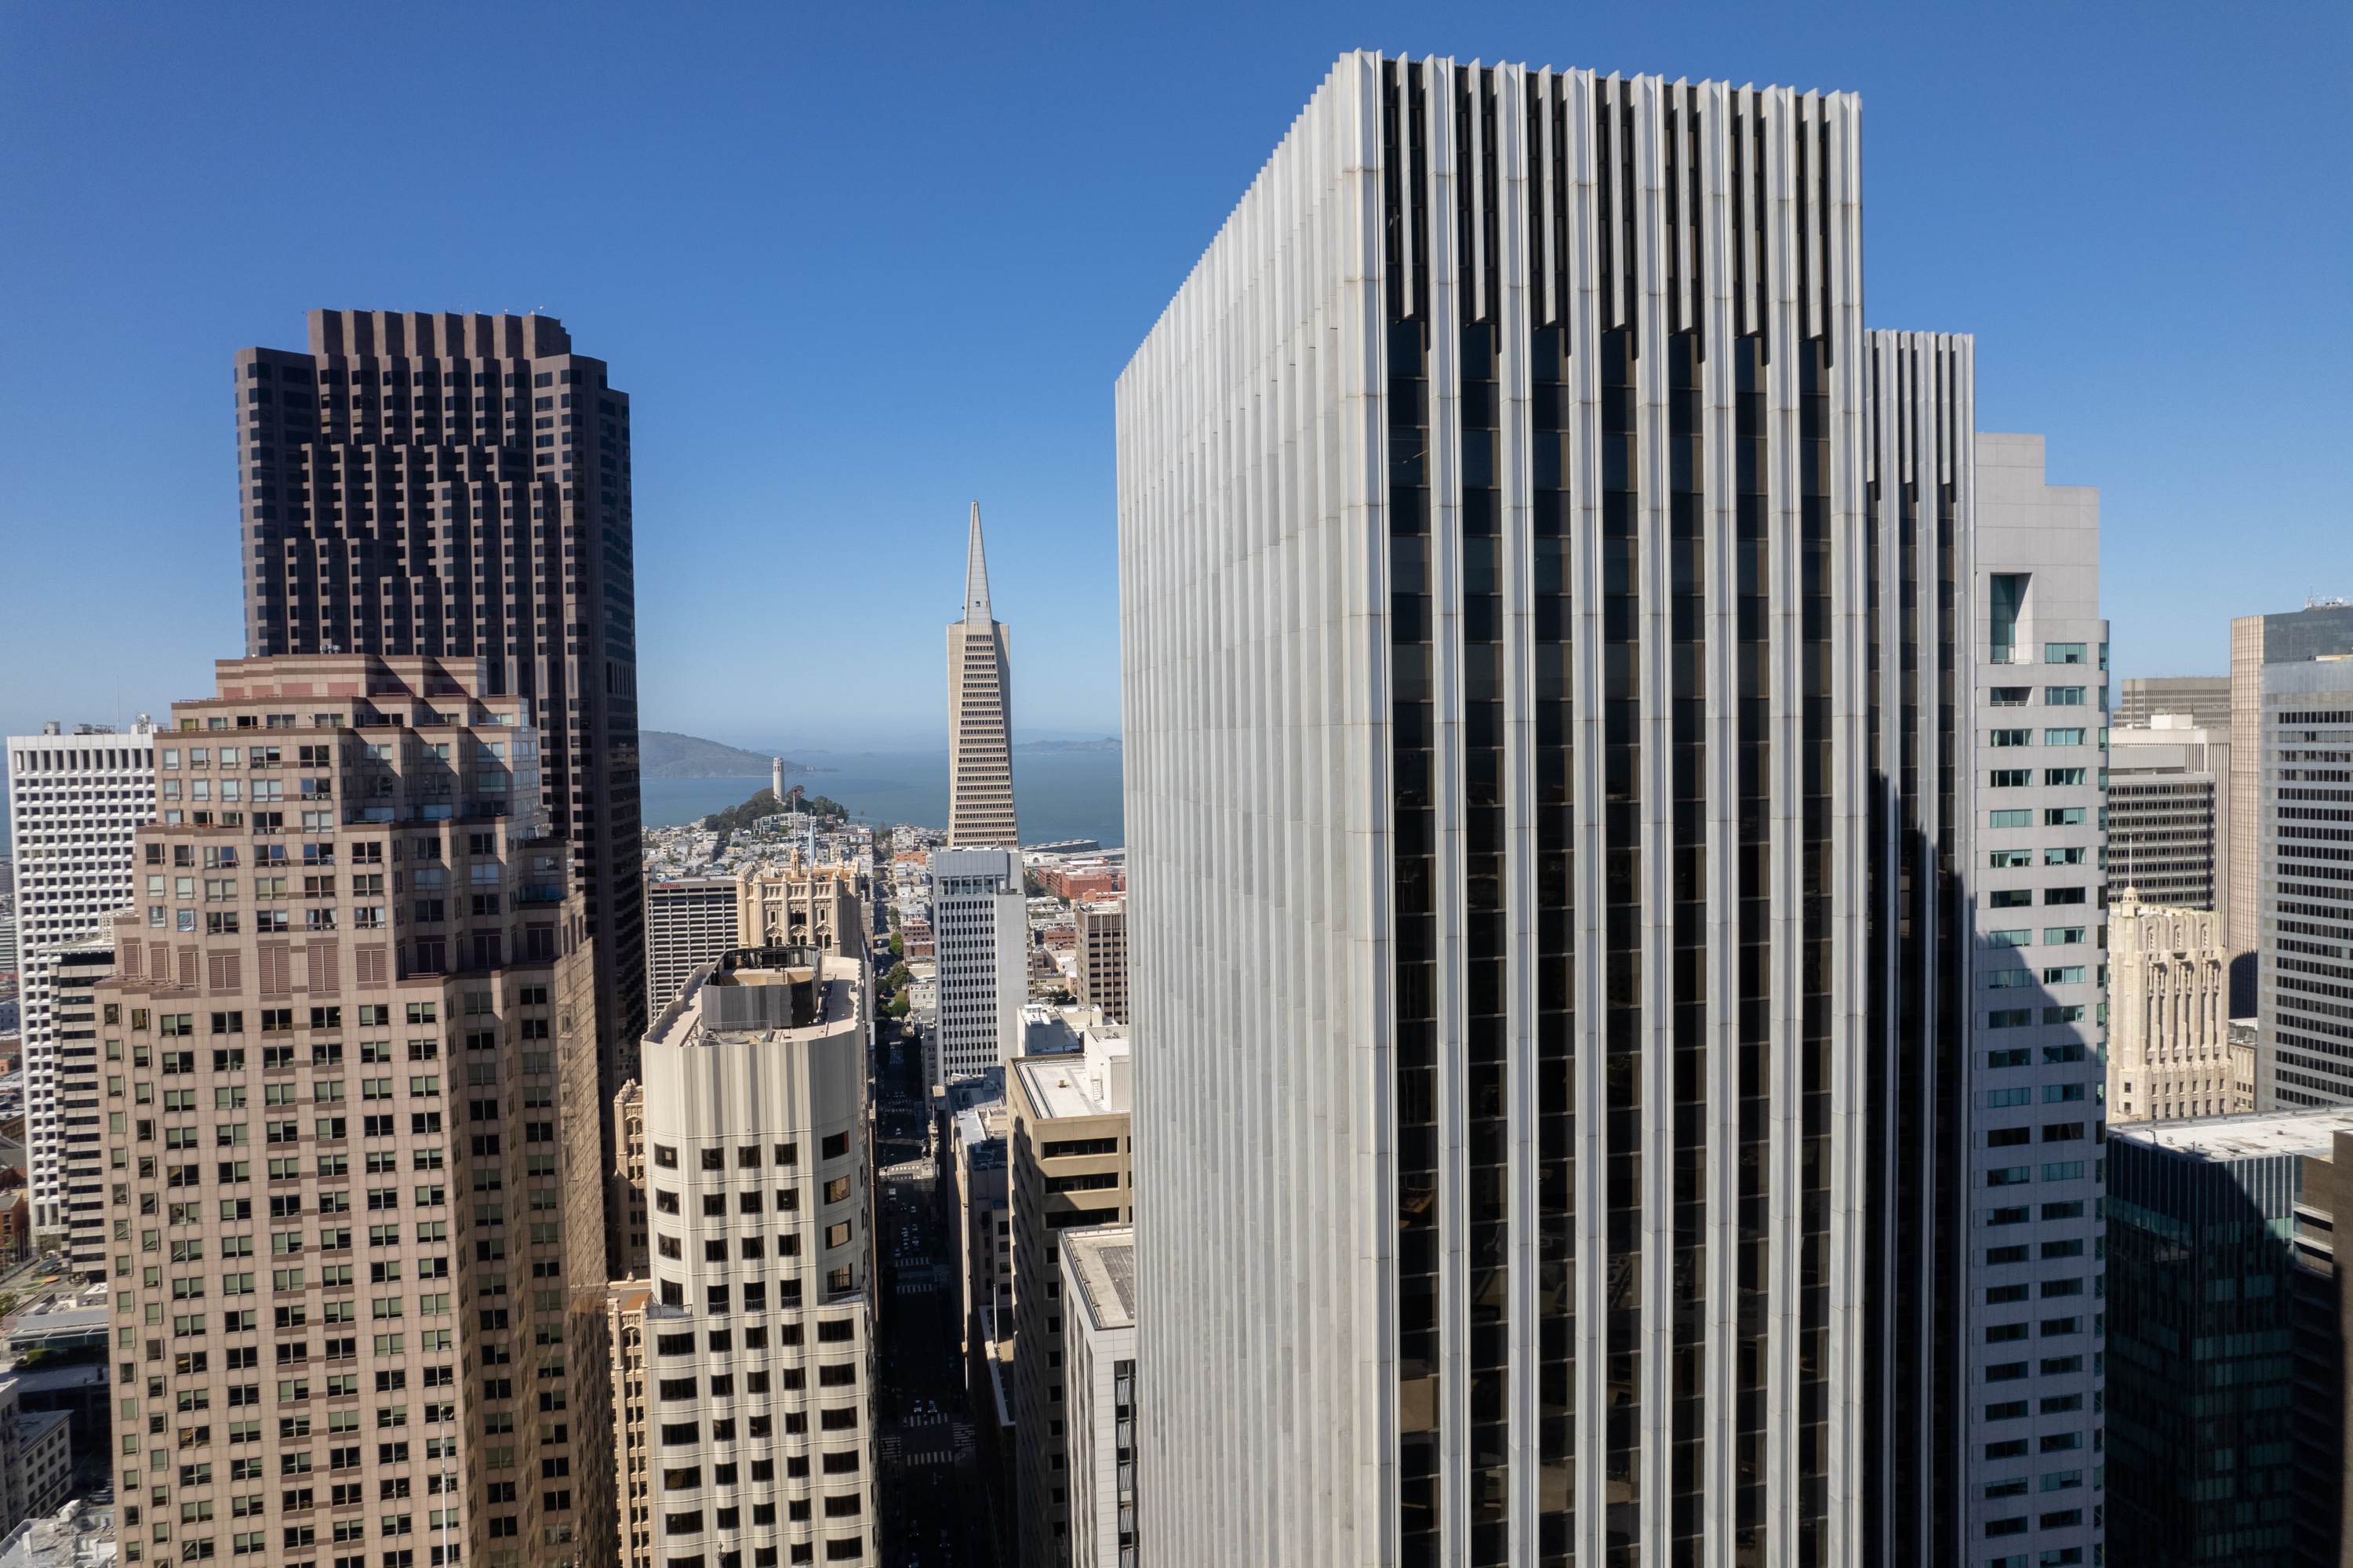 A cityscape with skyscrapers under a clear blue sky, featuring the distinct Transamerica Pyramid in the distance.